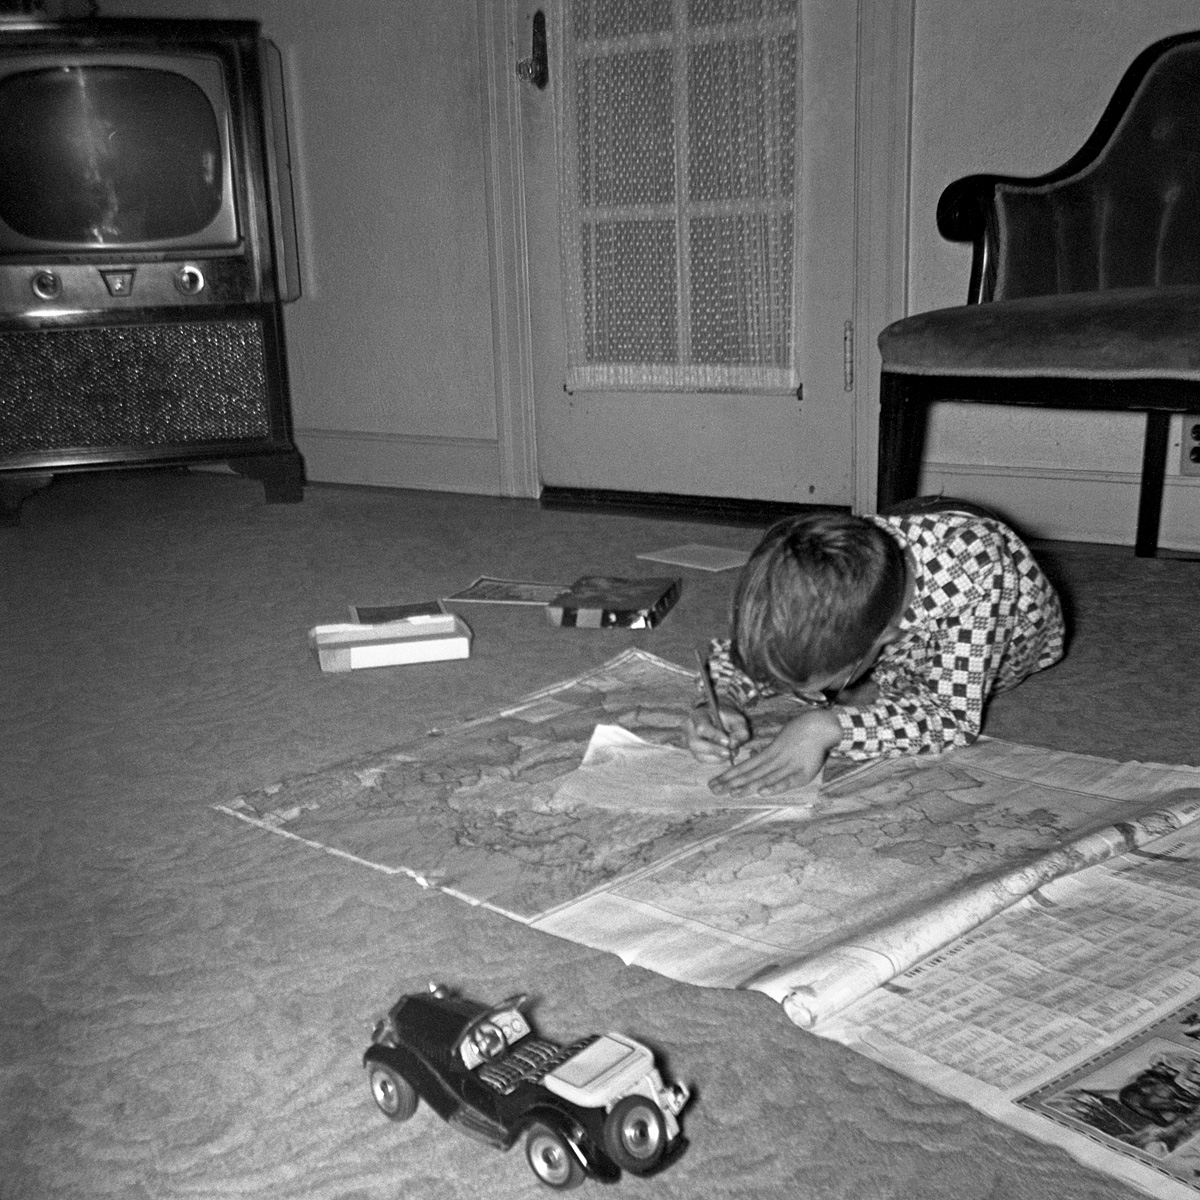 It's November in 1954 and you're an 8 year-old boy; given the following options, what do you do?

a) Watch TV;
b) Play with cool toy MG sports car;
c) Unroll giant set of maps and trace the borders of Czechoslovakia.

Made sense to me then. Actually, I still understand it. View full size.